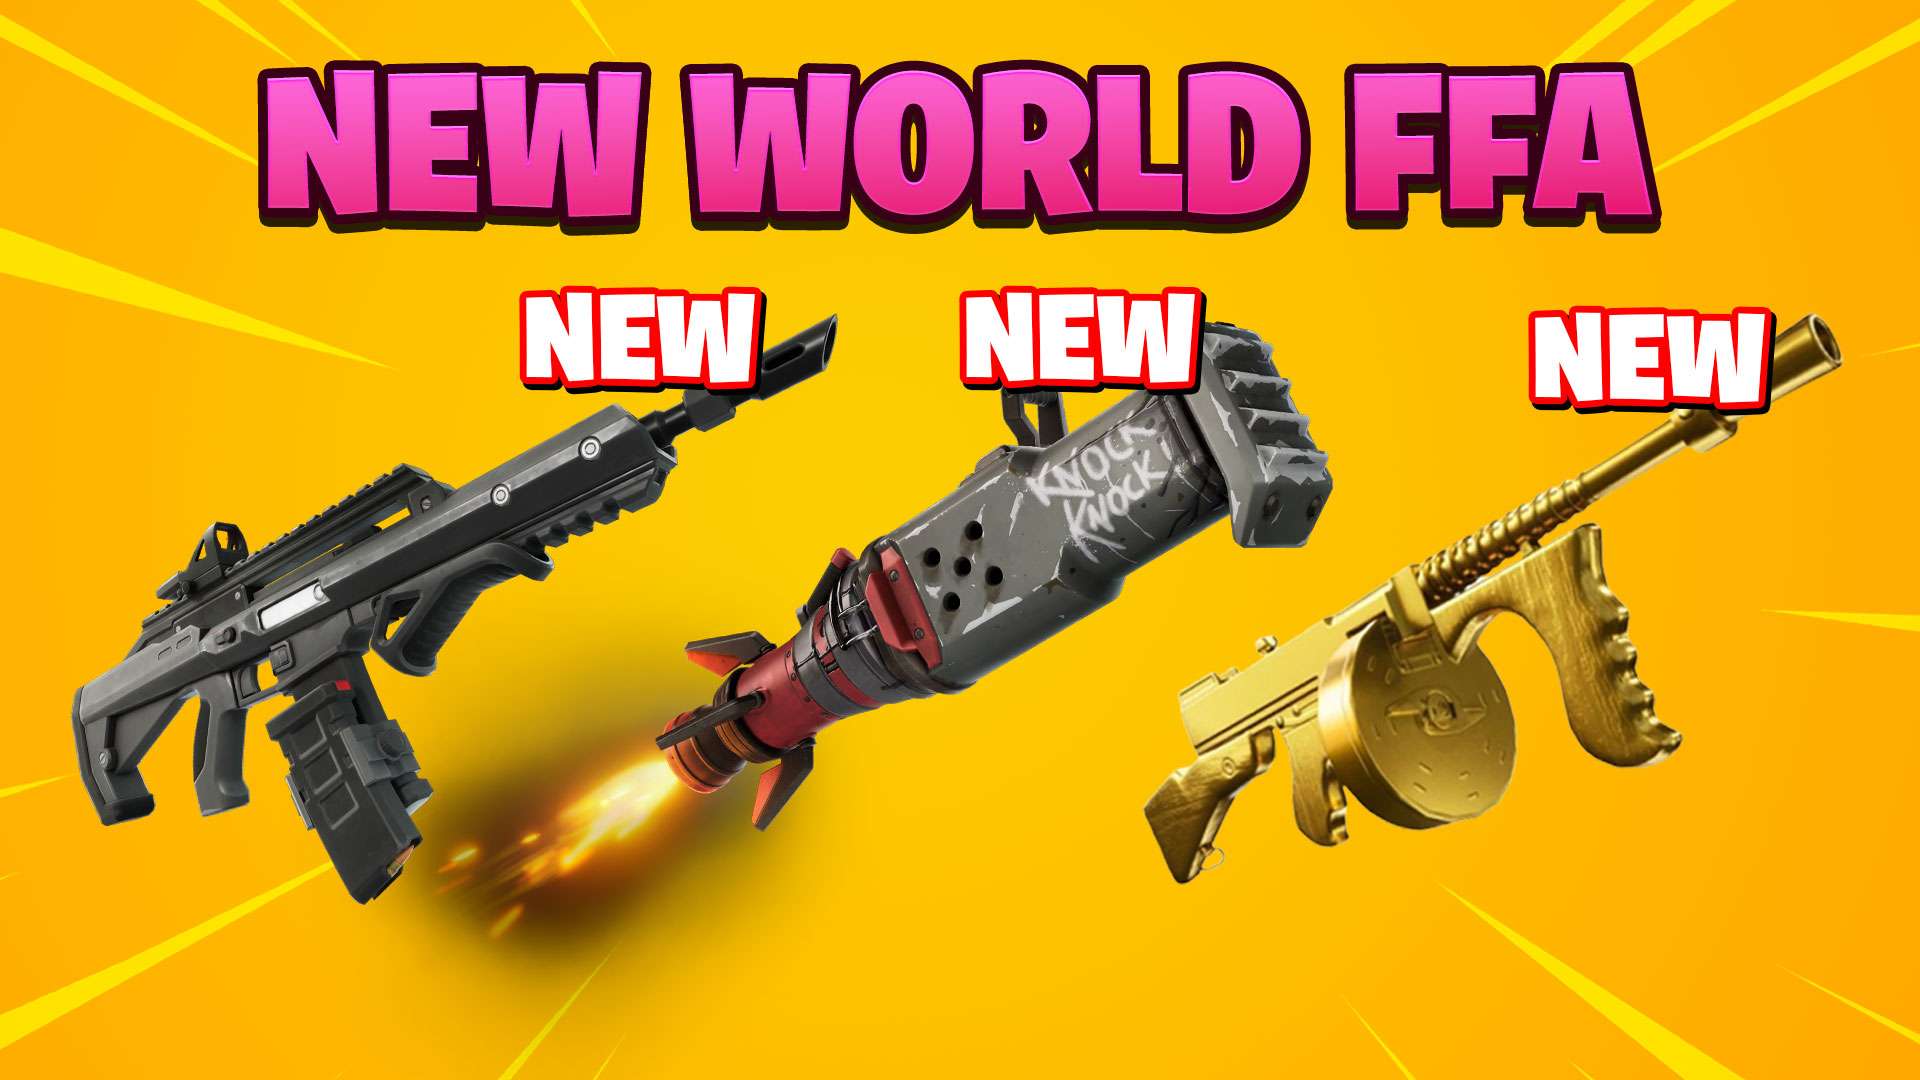 😱 NEW WORLD FFA - ALL WEAPONS & CARS